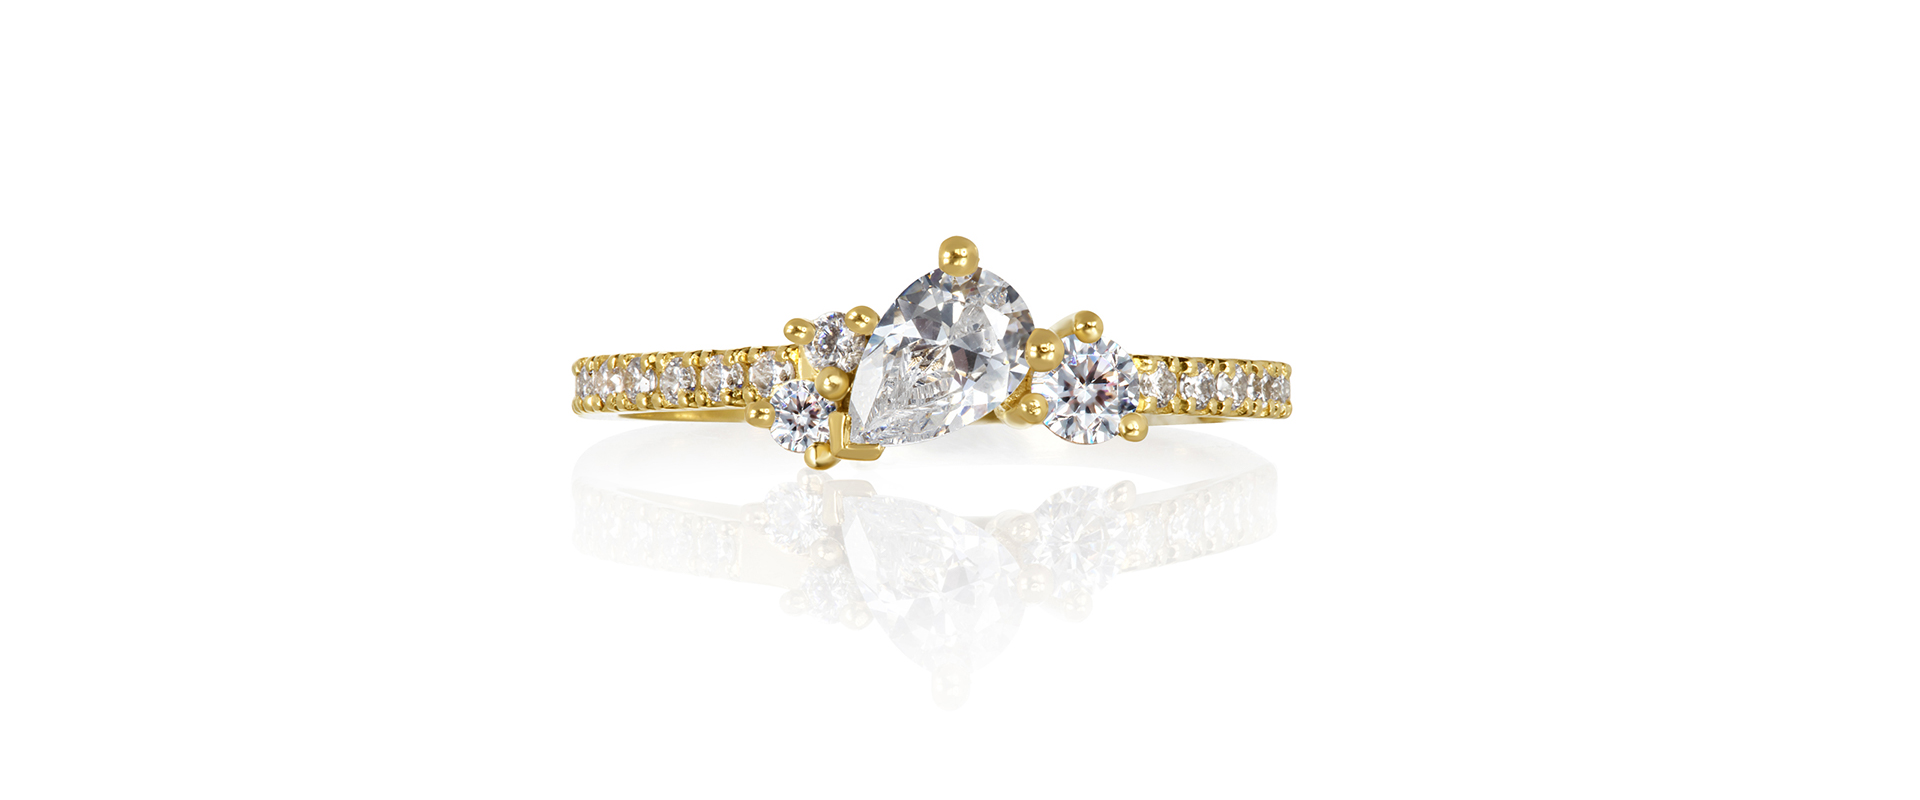 Astral cluster engagement ring 6 pear diamond - yellow gold